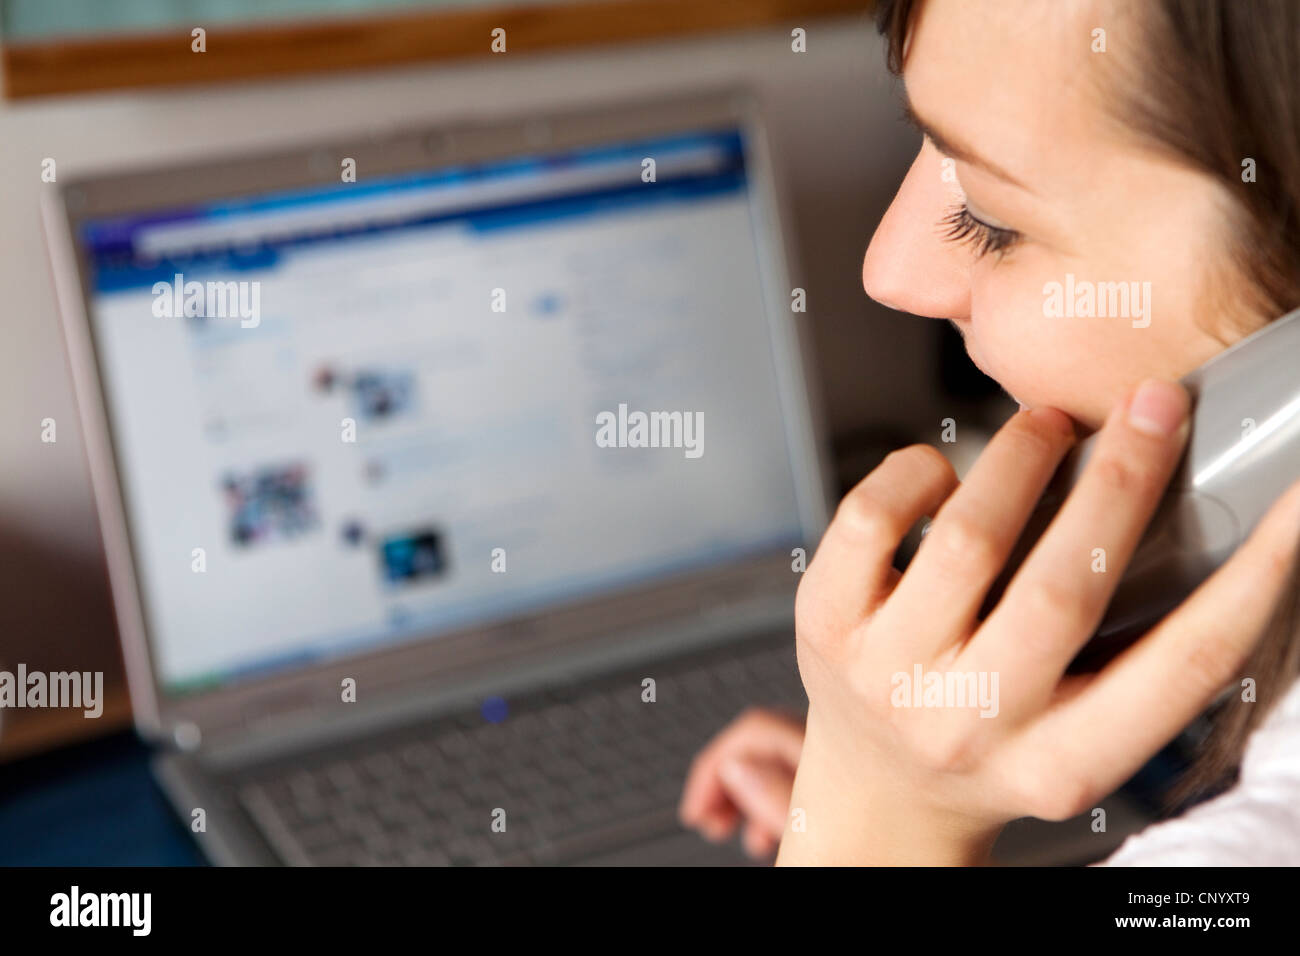 a woman on the phone in front of to computer,facebook Stock Photo